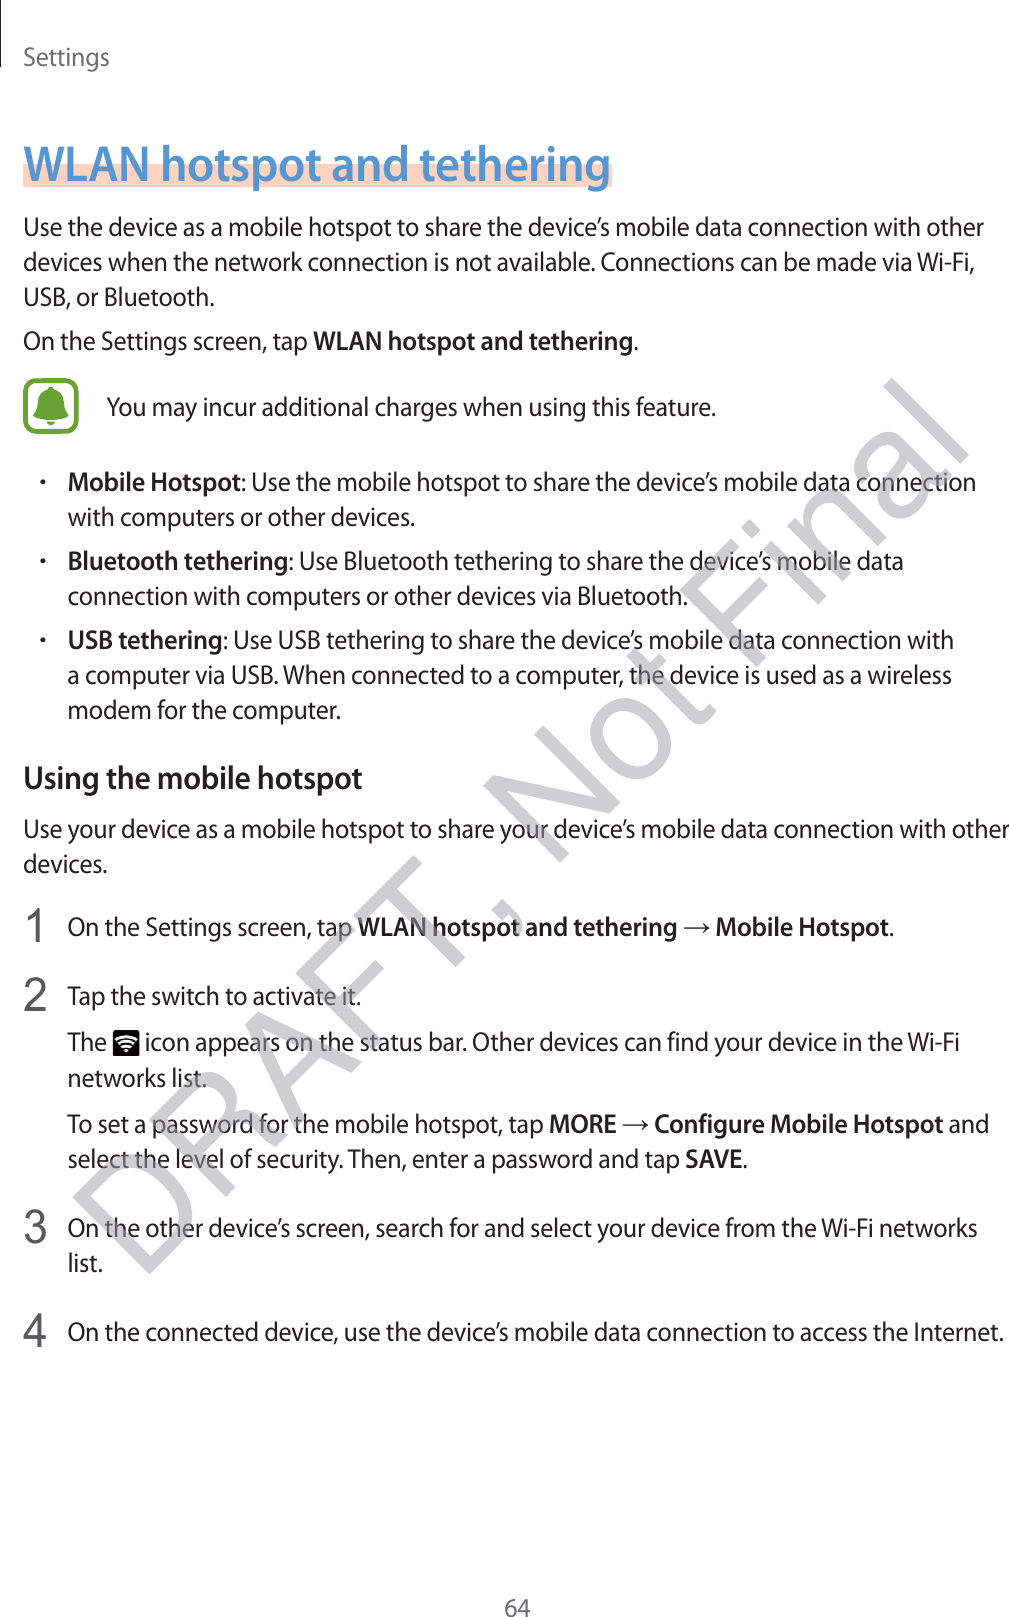 Settings64WLAN hotspot and tetheringUse the device as a mobile hotspot to share the device’s mobile data connection with other devices when the network connection is not available. Connections can be made via Wi-Fi, USB, or Bluetooth.On the Settings screen, tap WLAN hotspot and tethering.You may incur additional charges when using this feature.rMobile Hotspot: Use the mobile hotspot to share the device’s mobile data connection with computers or other devices.rBluetooth tethering: Use Bluetooth tethering to share the device’s mobile data connection with computers or other devices via Bluetooth.rUSB tethering: Use USB tethering to share the device’s mobile data connection with a computer via USB. When connected to a computer, the device is used as a wireless modem for the computer.Using the mobile hotspotUse your device as a mobile hotspot to share your device’s mobile data connection with other devices.1 On the Settings screen, tap WLAN hotspot and tethering → Mobile Hotspot.2 Tap the switch to activate it.The   icon appears on the status bar. Other devices can find your device in the Wi-Fi networks list.To set a password for the mobile hotspot, tap MORE → Configure Mobile Hotspot and select the level of security. Then, enter a password and tap SAVE.3 On the other device’s screen, search for and select your device from the Wi-Fi networks list.4 On the connected device, use the device’s mobile data connection to access the Internet.DRAFT, Not Final